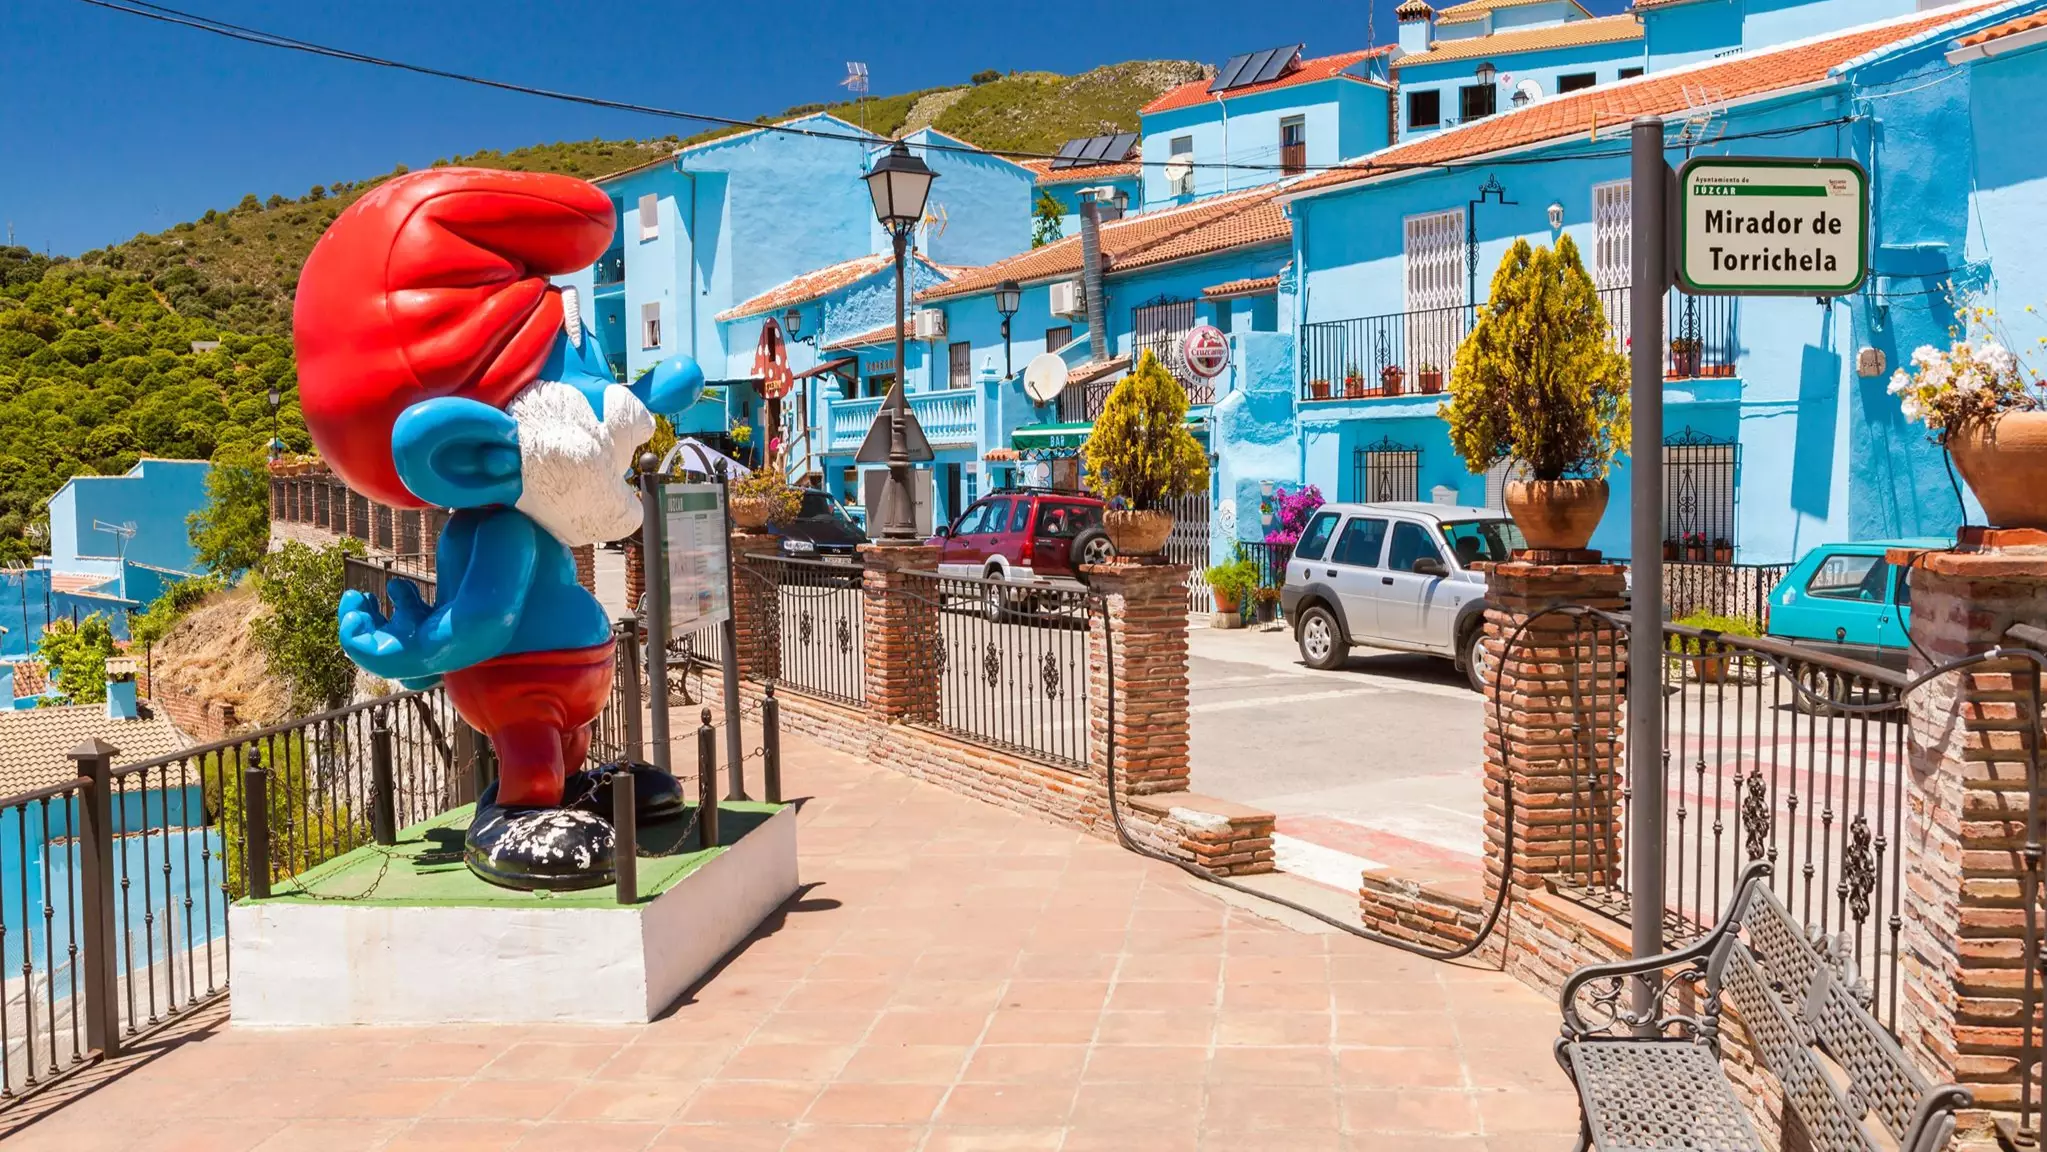 Real Life Spanish Smurf Village Bans Swimming In River Due To Covid-19 Risks